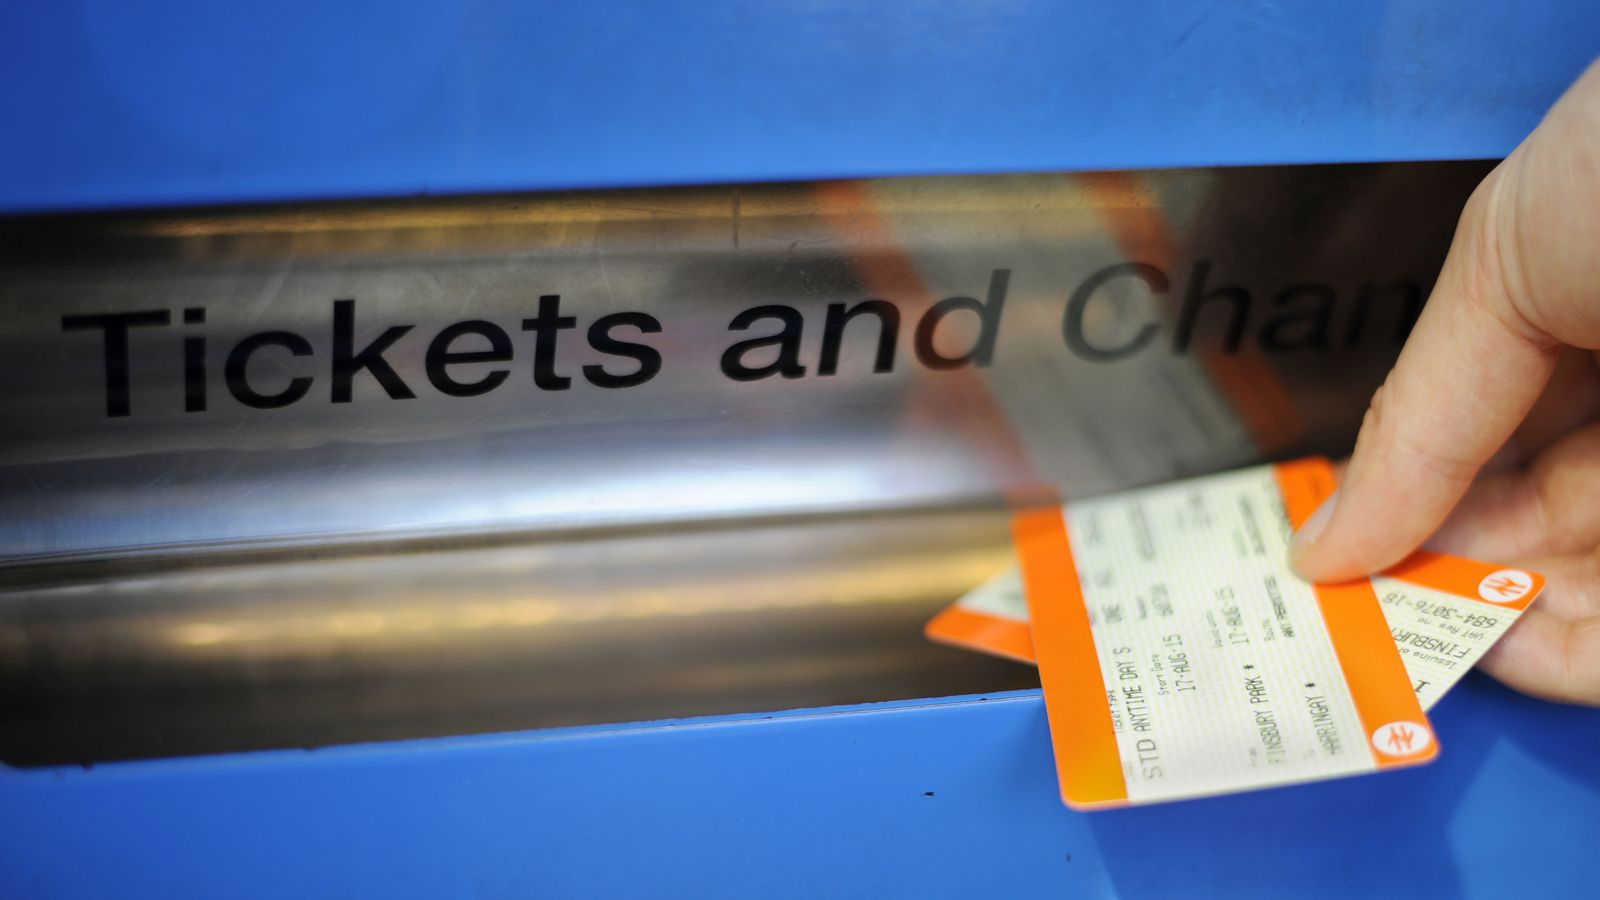 Rail ticket office closures will go 'too far, too fast'